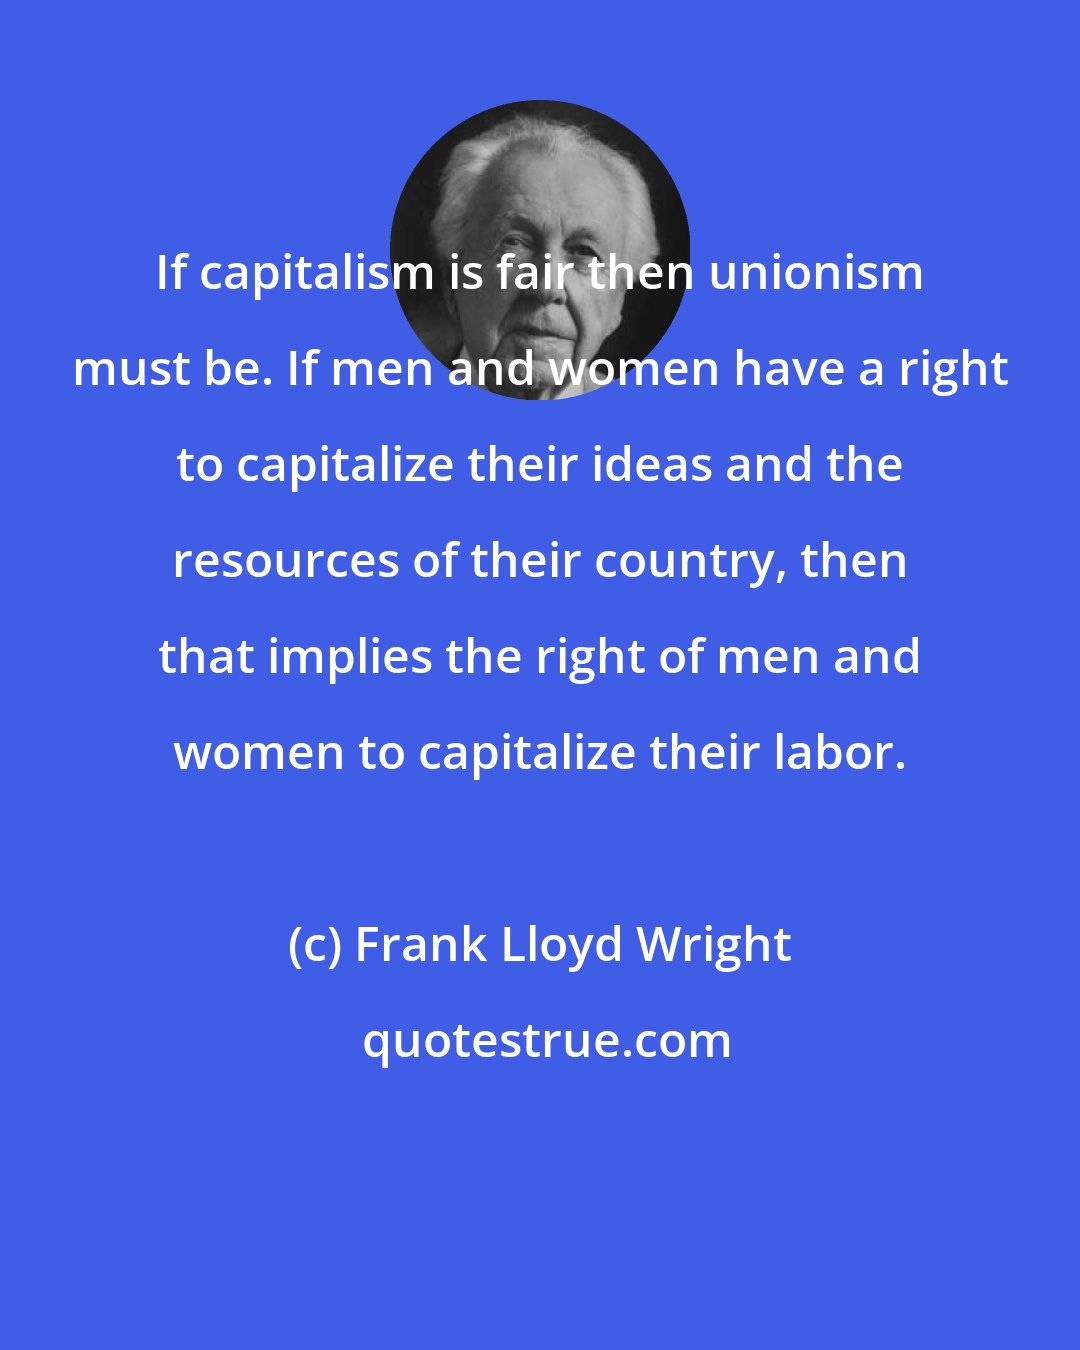 Frank Lloyd Wright: If capitalism is fair then unionism must be. If men and women have a right to capitalize their ideas and the resources of their country, then that implies the right of men and women to capitalize their labor.